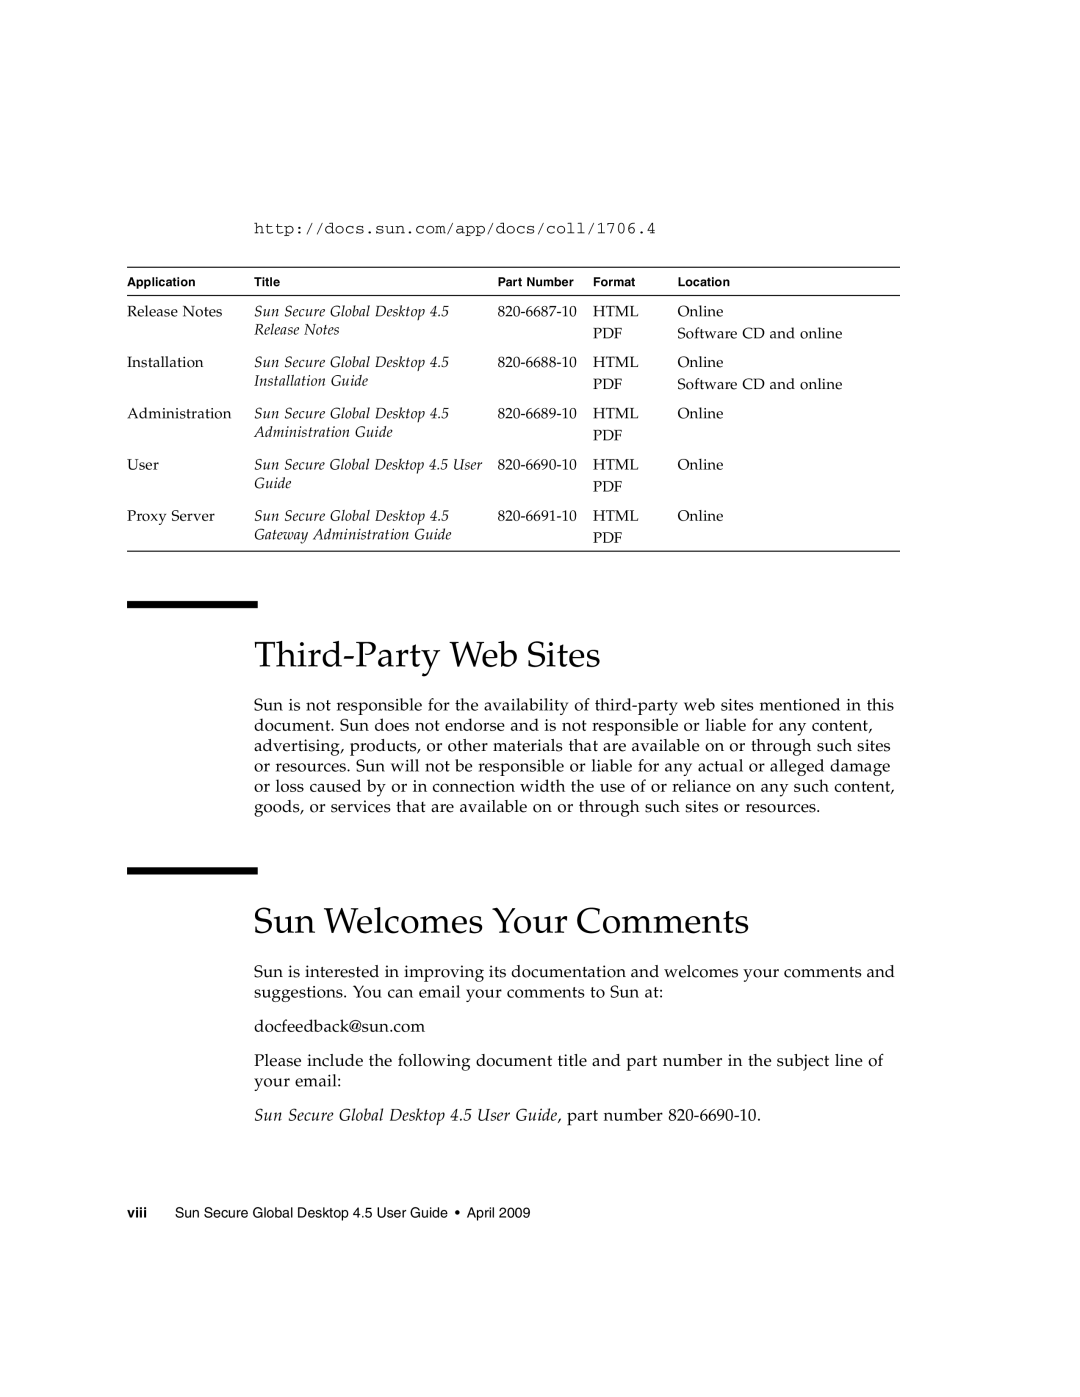 Sun Microsystems 4.5 manual Third-Party Web Sites, Sun Welcomes Your Comments 